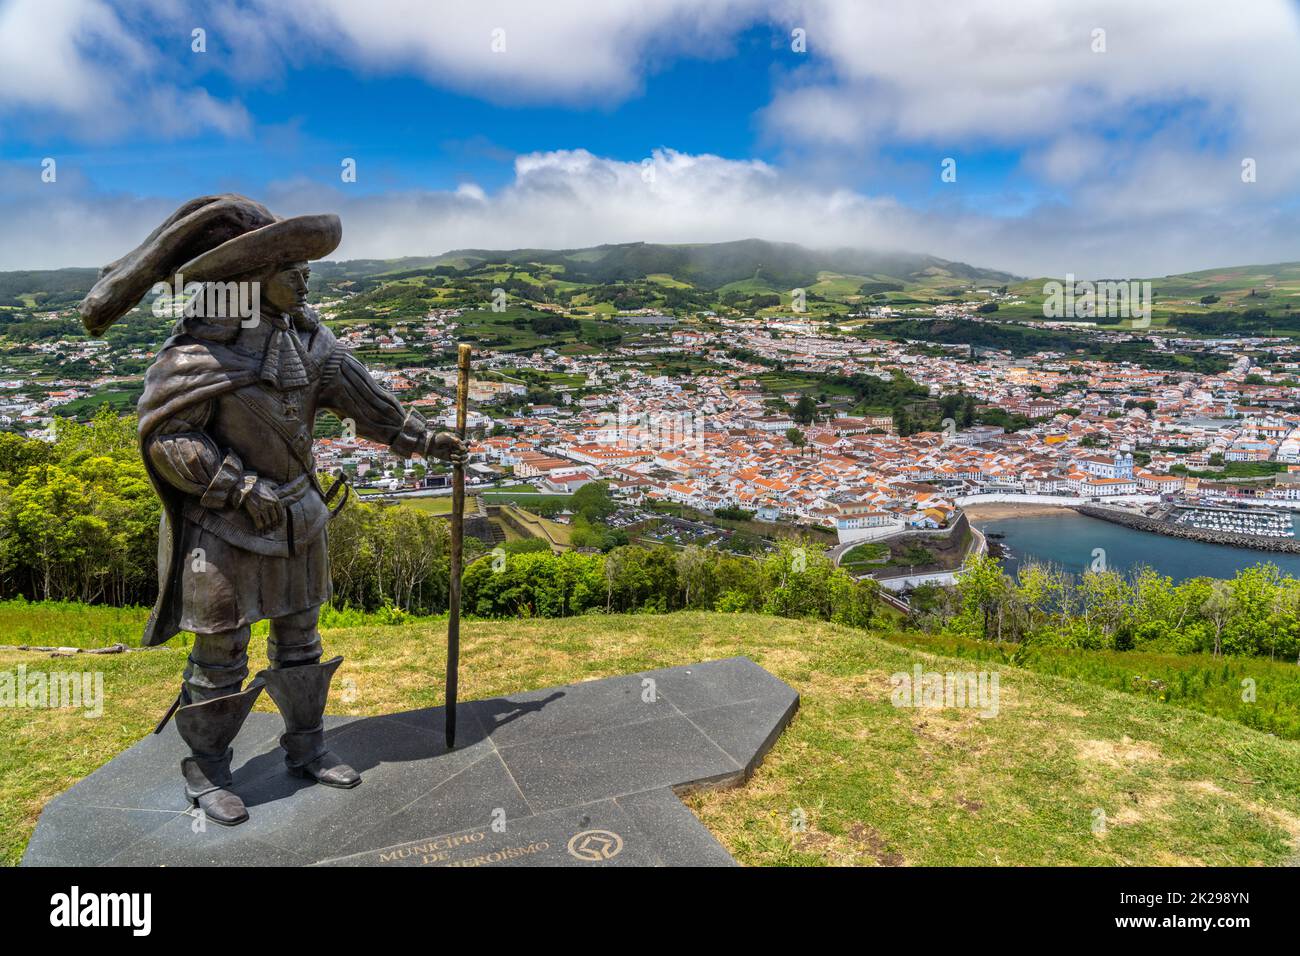 Statue of Afonso VI Second King of Portugal on Monte Brasil with a view of the historic city centre, public beach called the Praia de Angra do Heroismo below, in Angra do Heroismo, Terceira Island, Azores, Portugal. Stock Photo